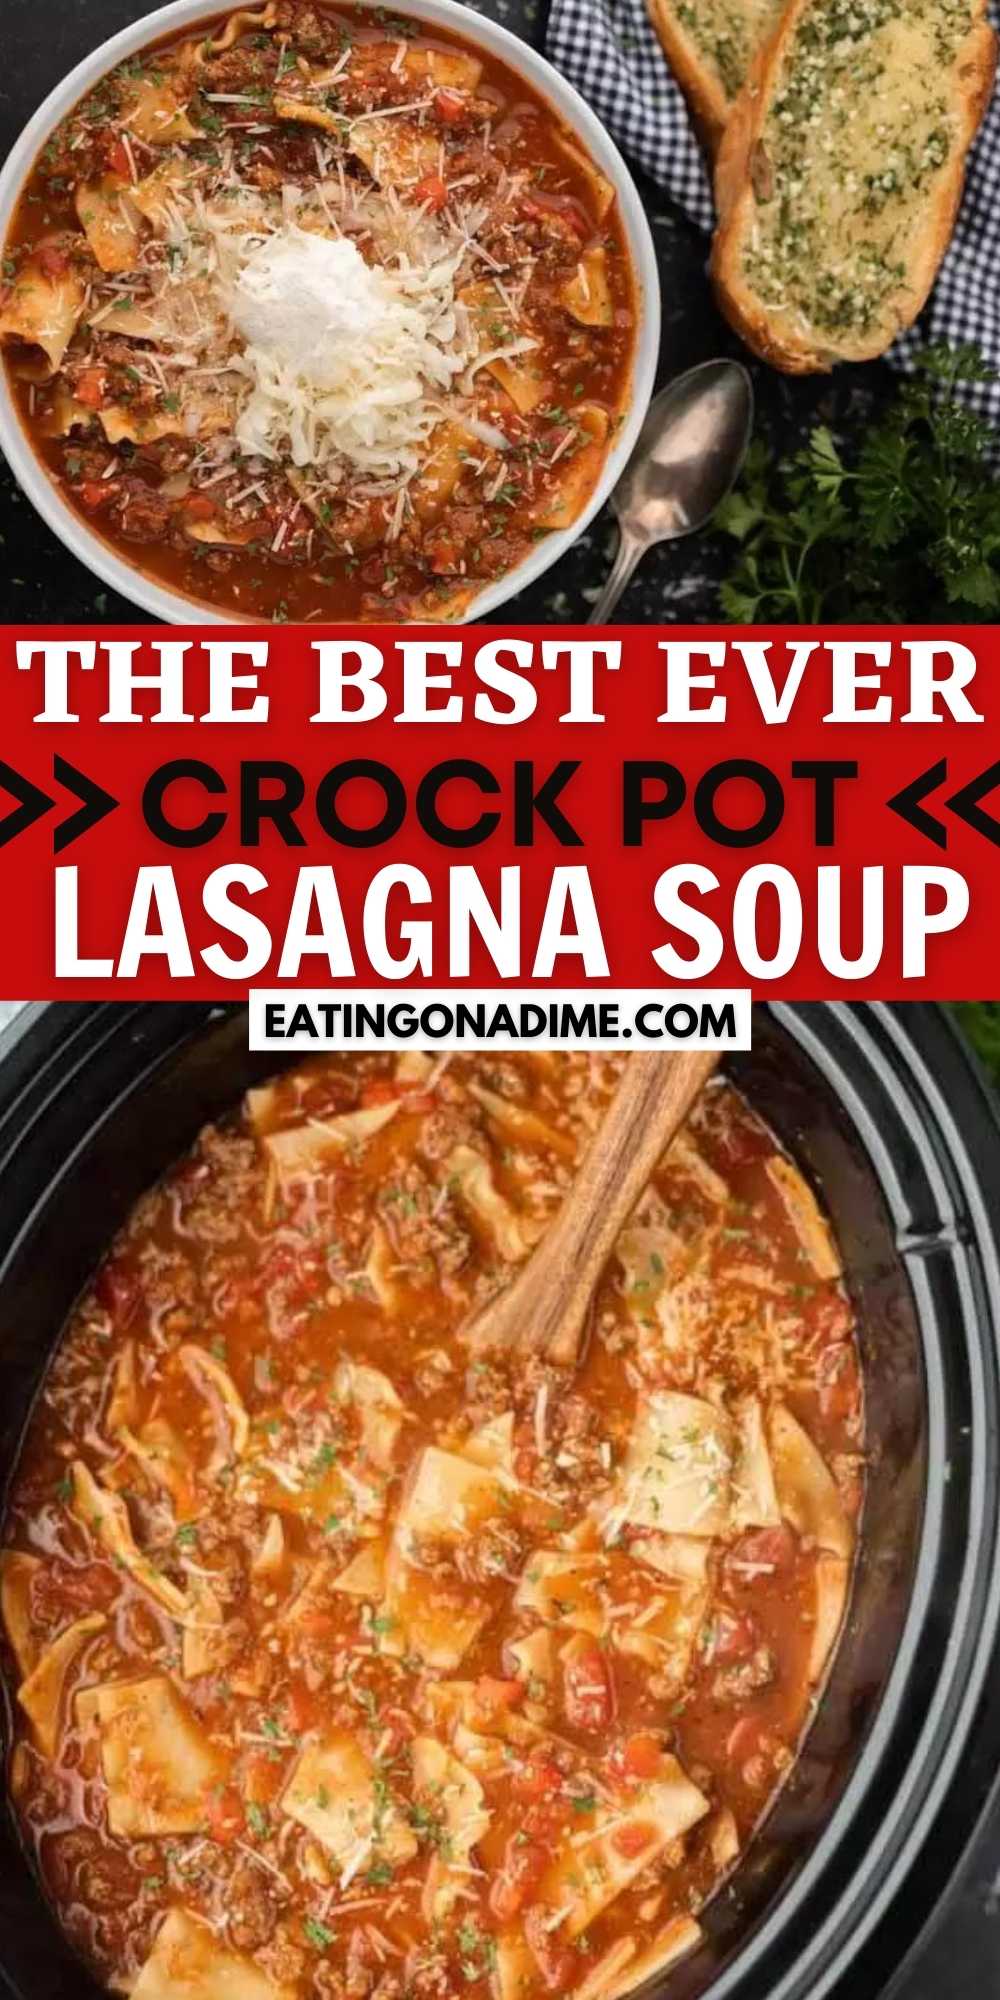 You have to try this easy crock pot lasagna soup recipe! A lasagna soup recipe that tastes just like lasagna without all the work. Plus it’s super easy to make in a slow cooker!  This is one of my favorite soup recipes! #eatingonadime #crockpotrecipes #souprecipes #slowcookerrecipes 
